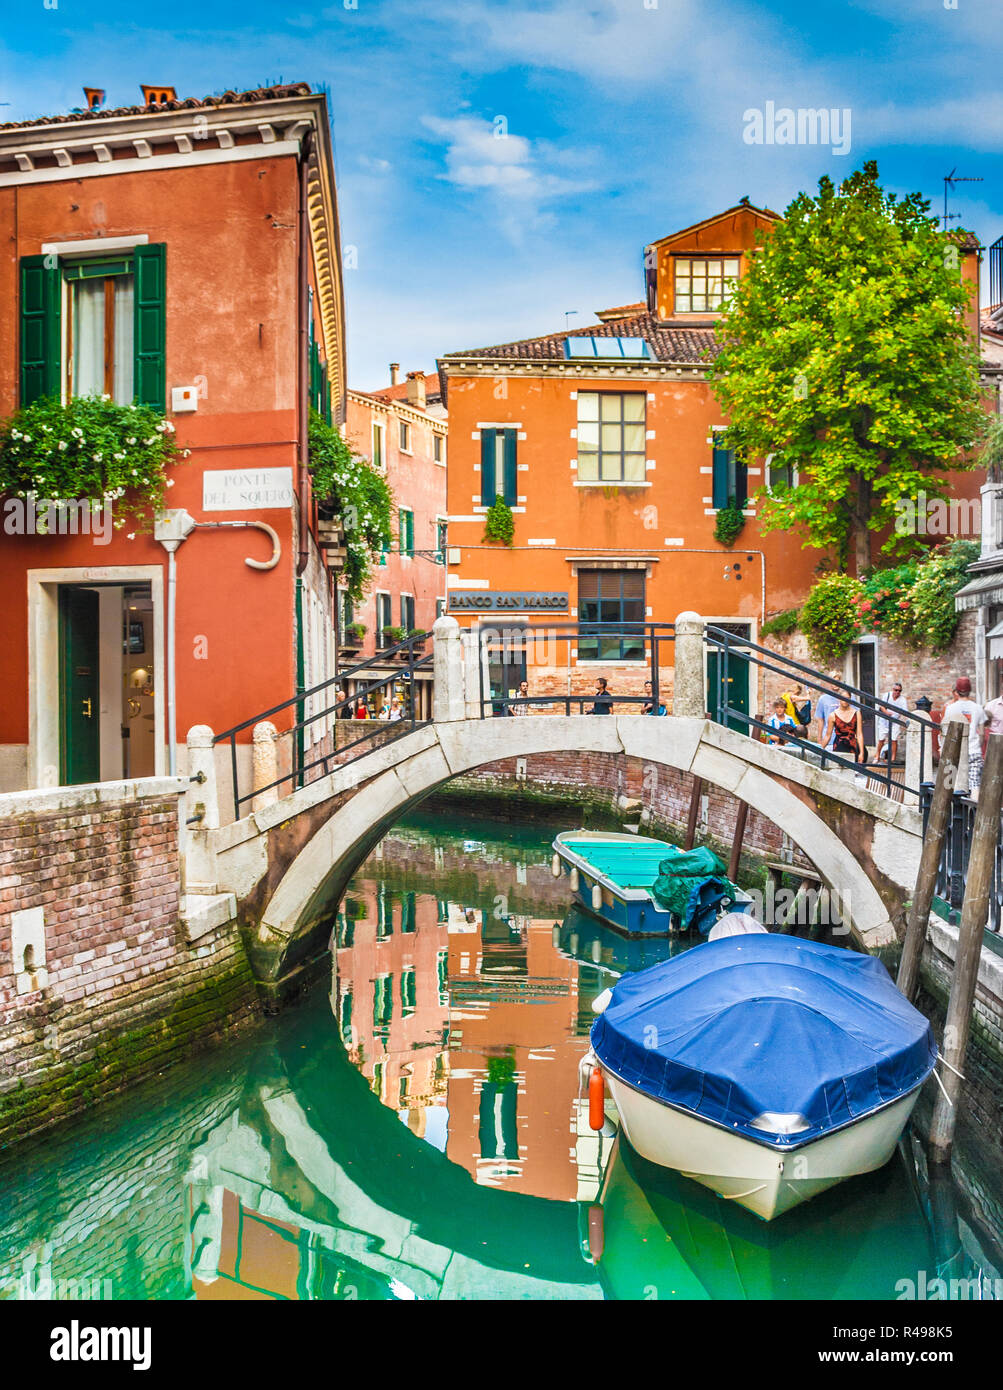 Beautiful scene with colorful houses and boats on a small channel in Venice, Italy Stock Photo